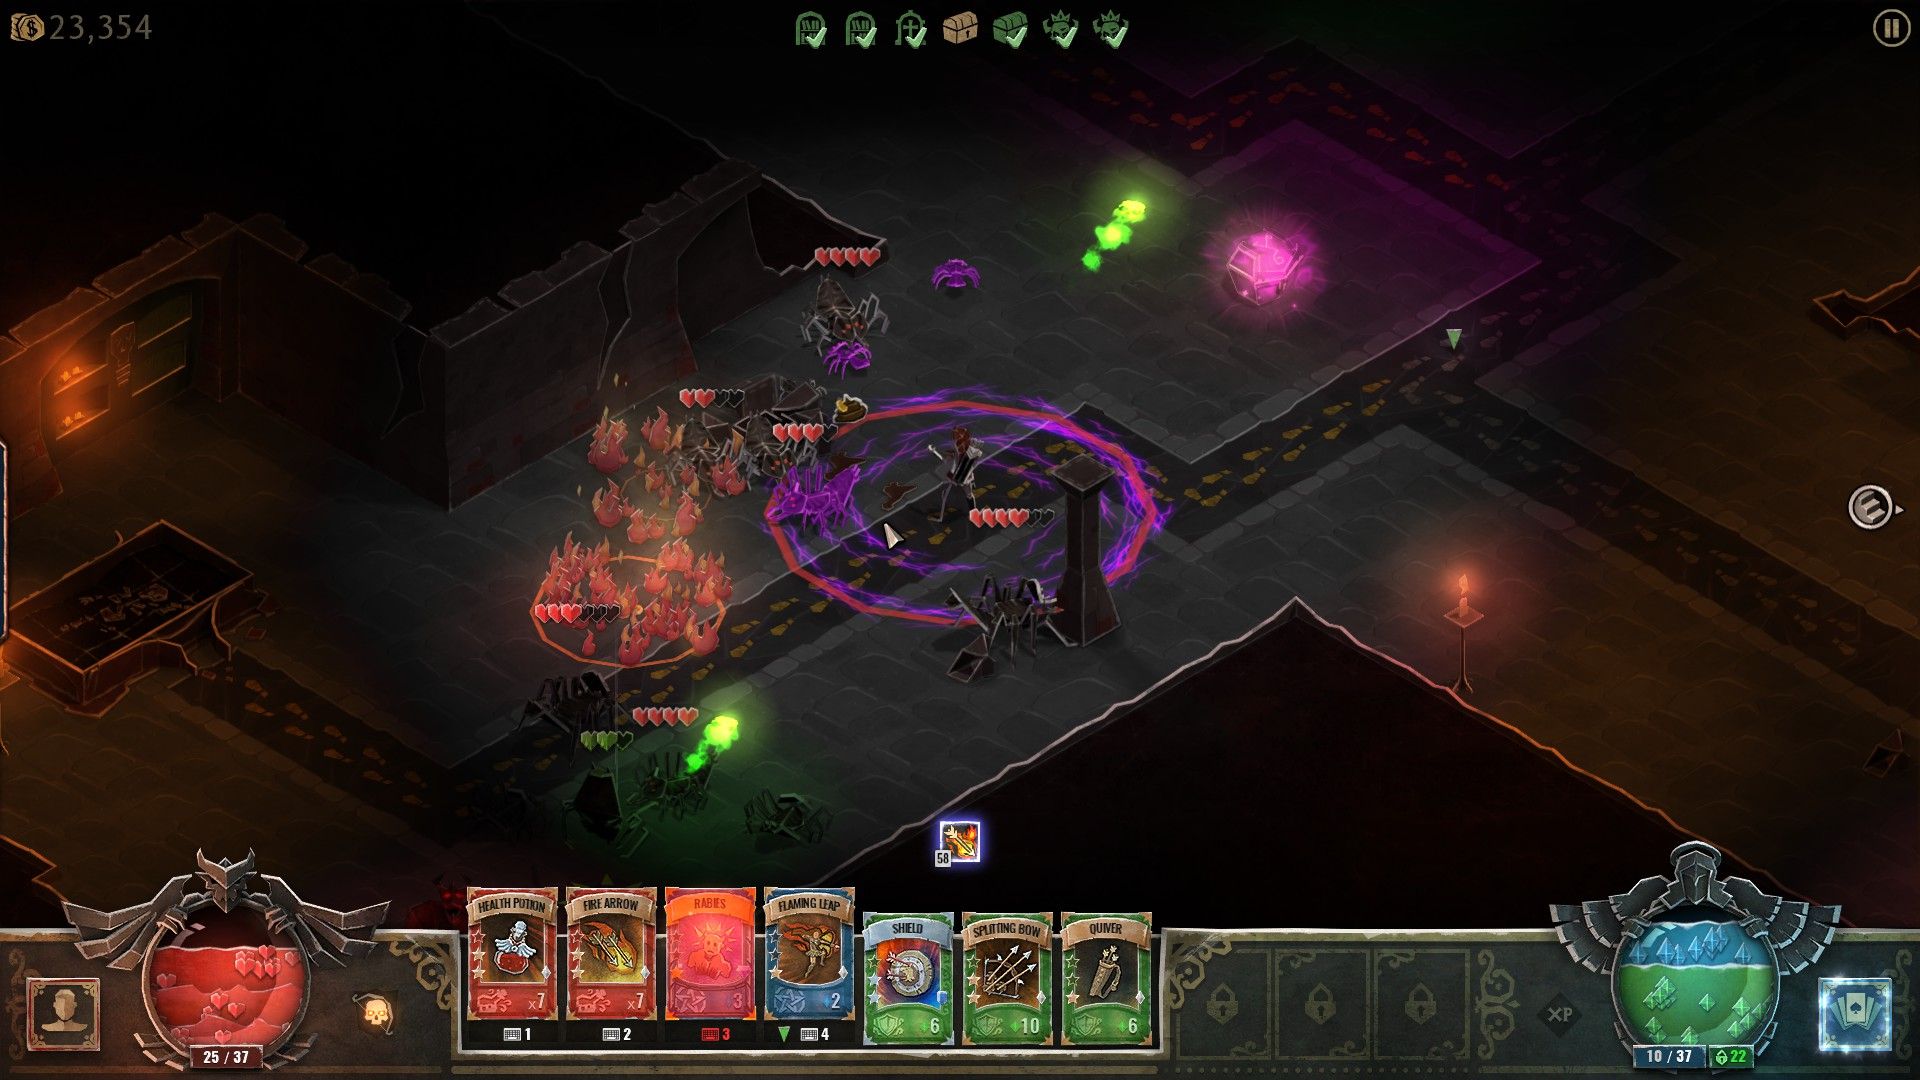 Book of Demons Review Dungeon Crawling, a player is encircled with a purple magical shield while several enemies surround them in a dungeon